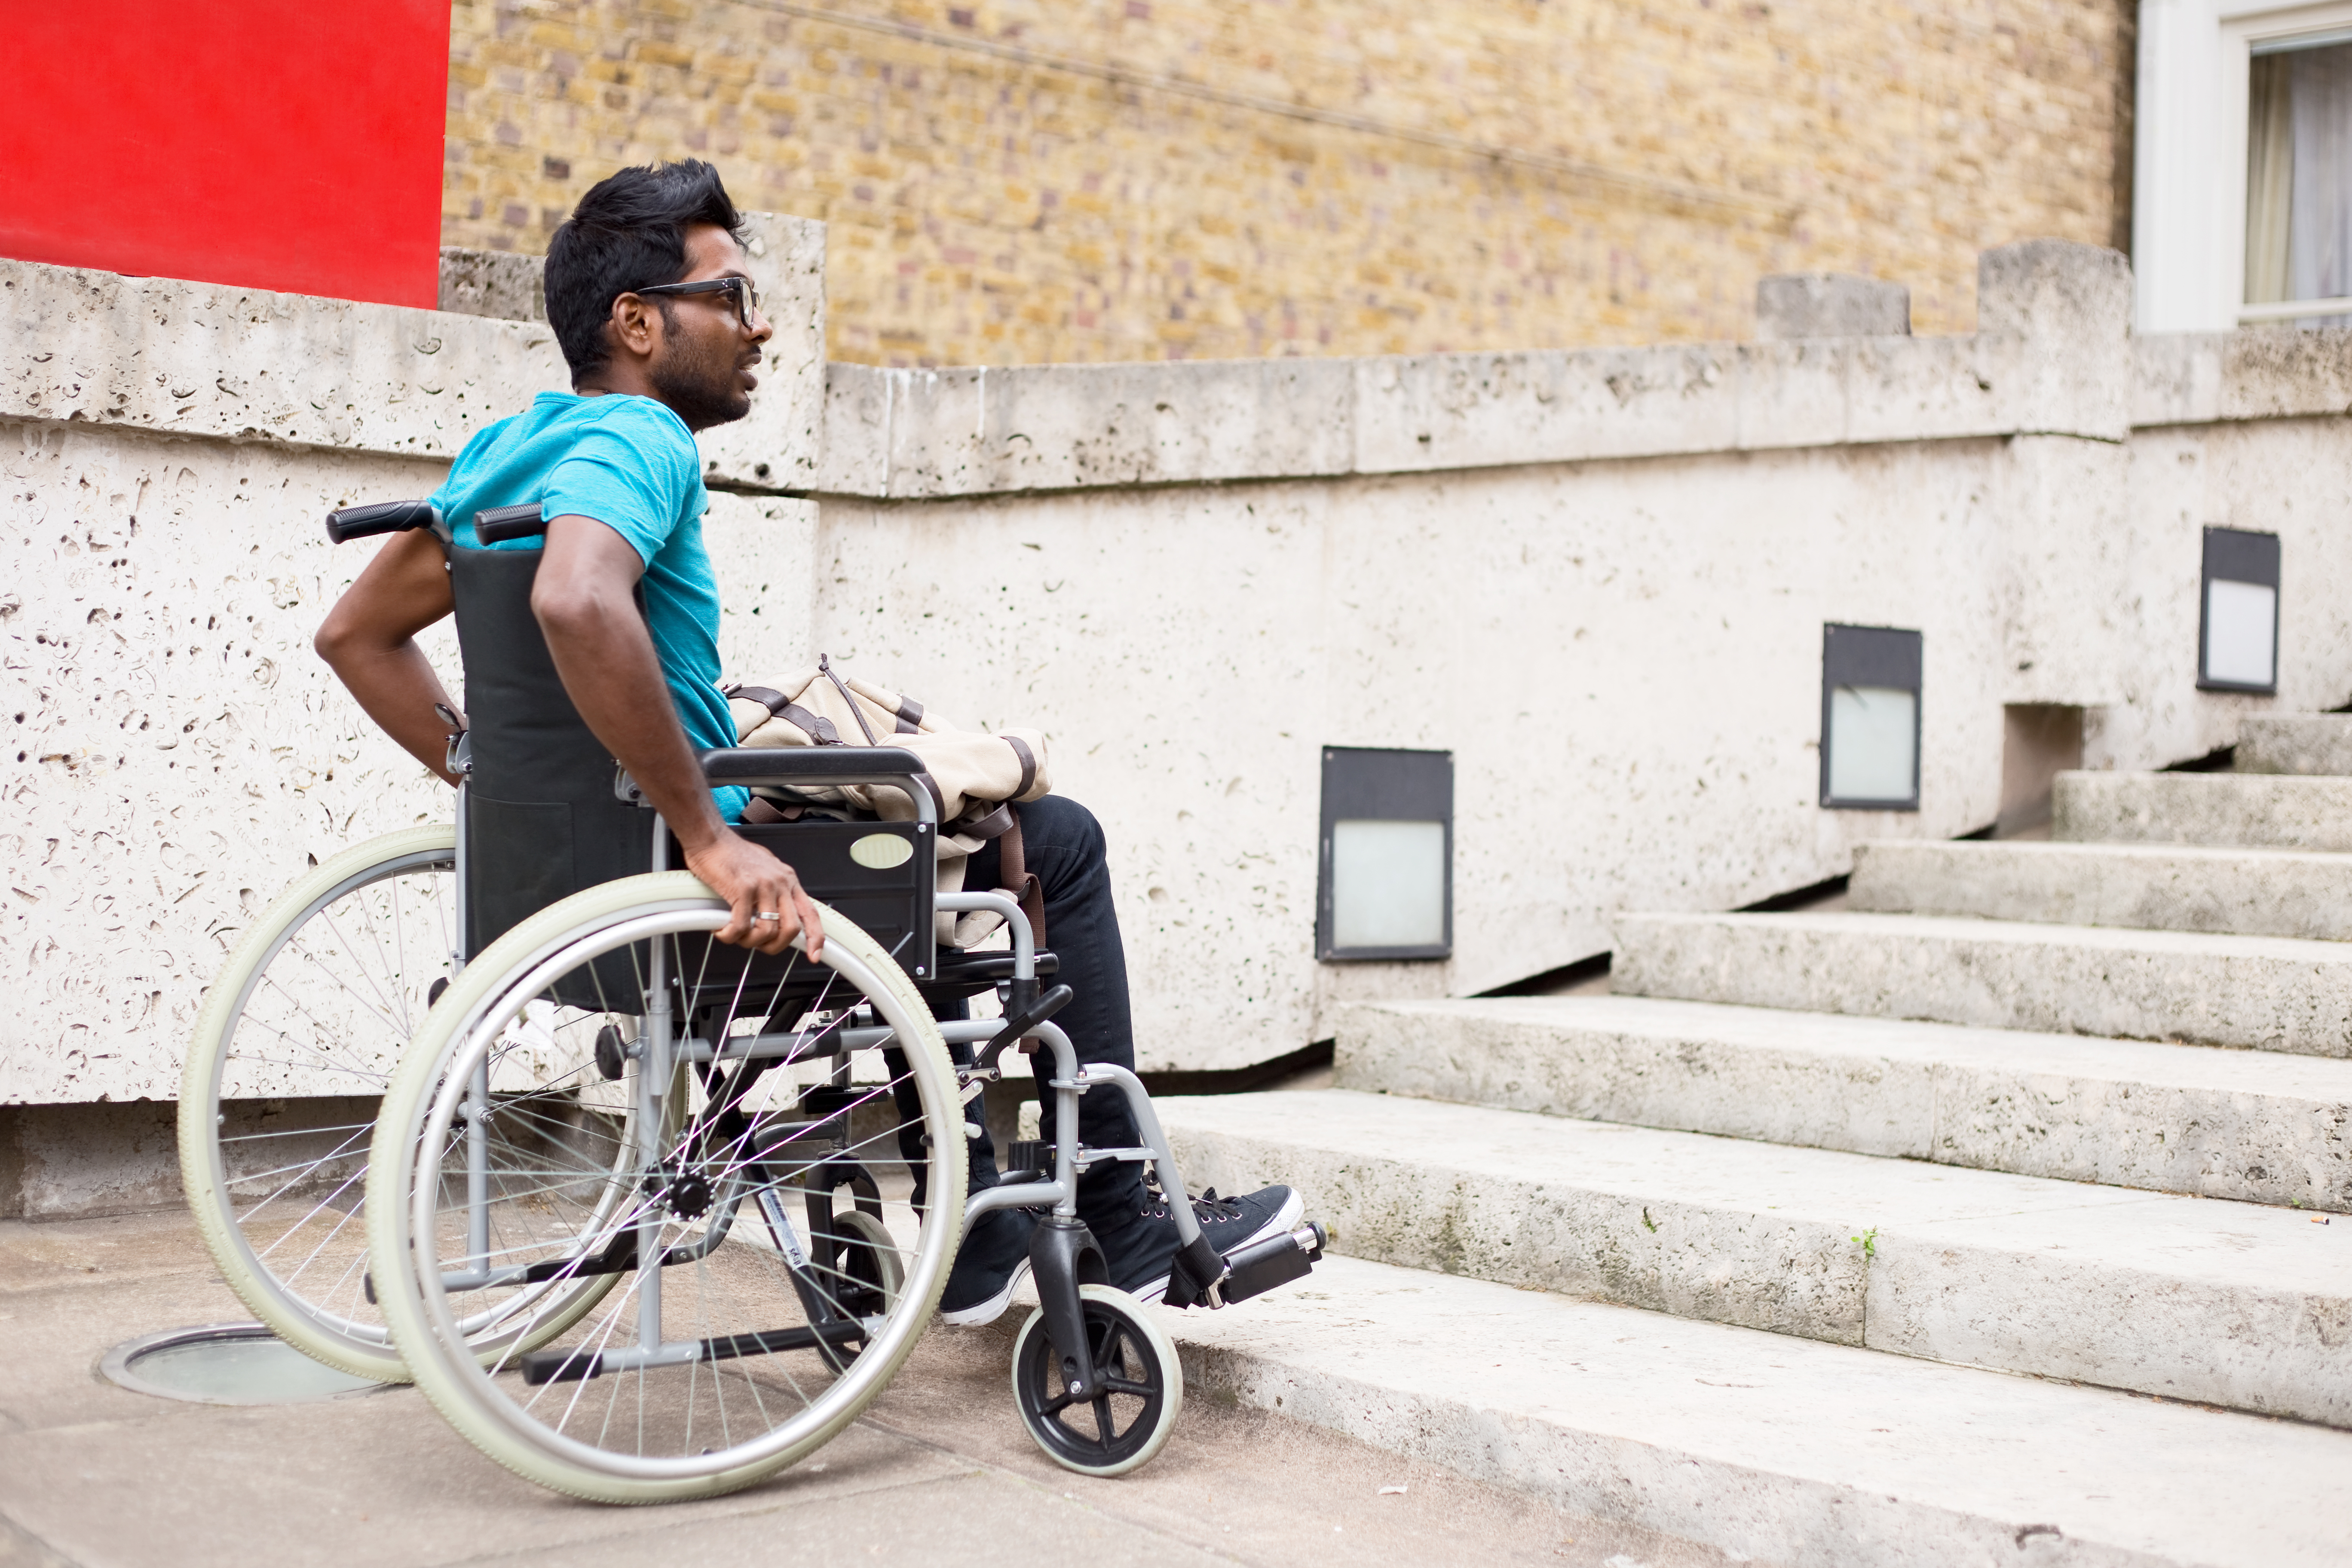 Here's how government can help disabled people in a digital world